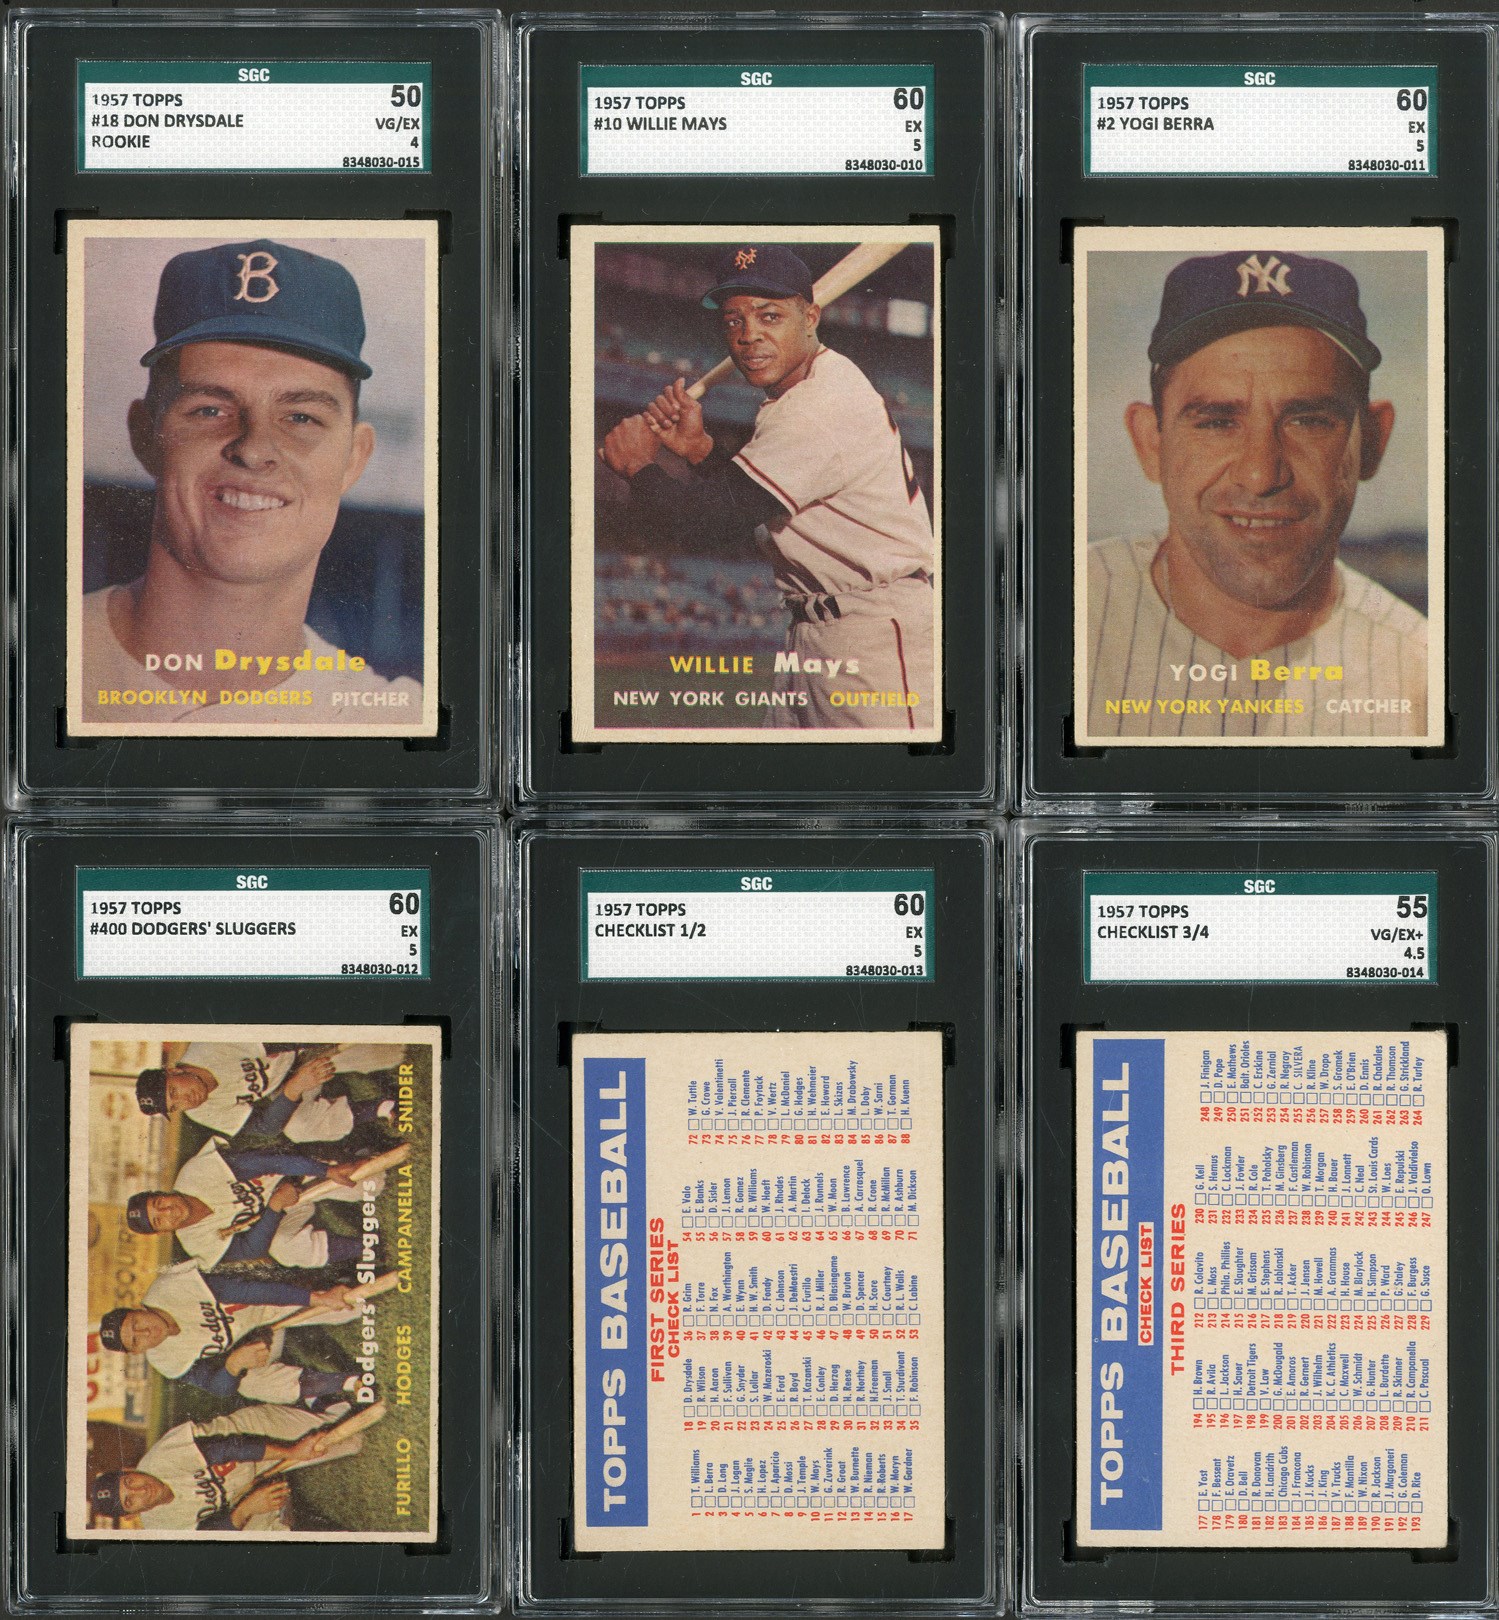 - 1957 Topps Complete Set (407 cards - 6 SGC Graded)